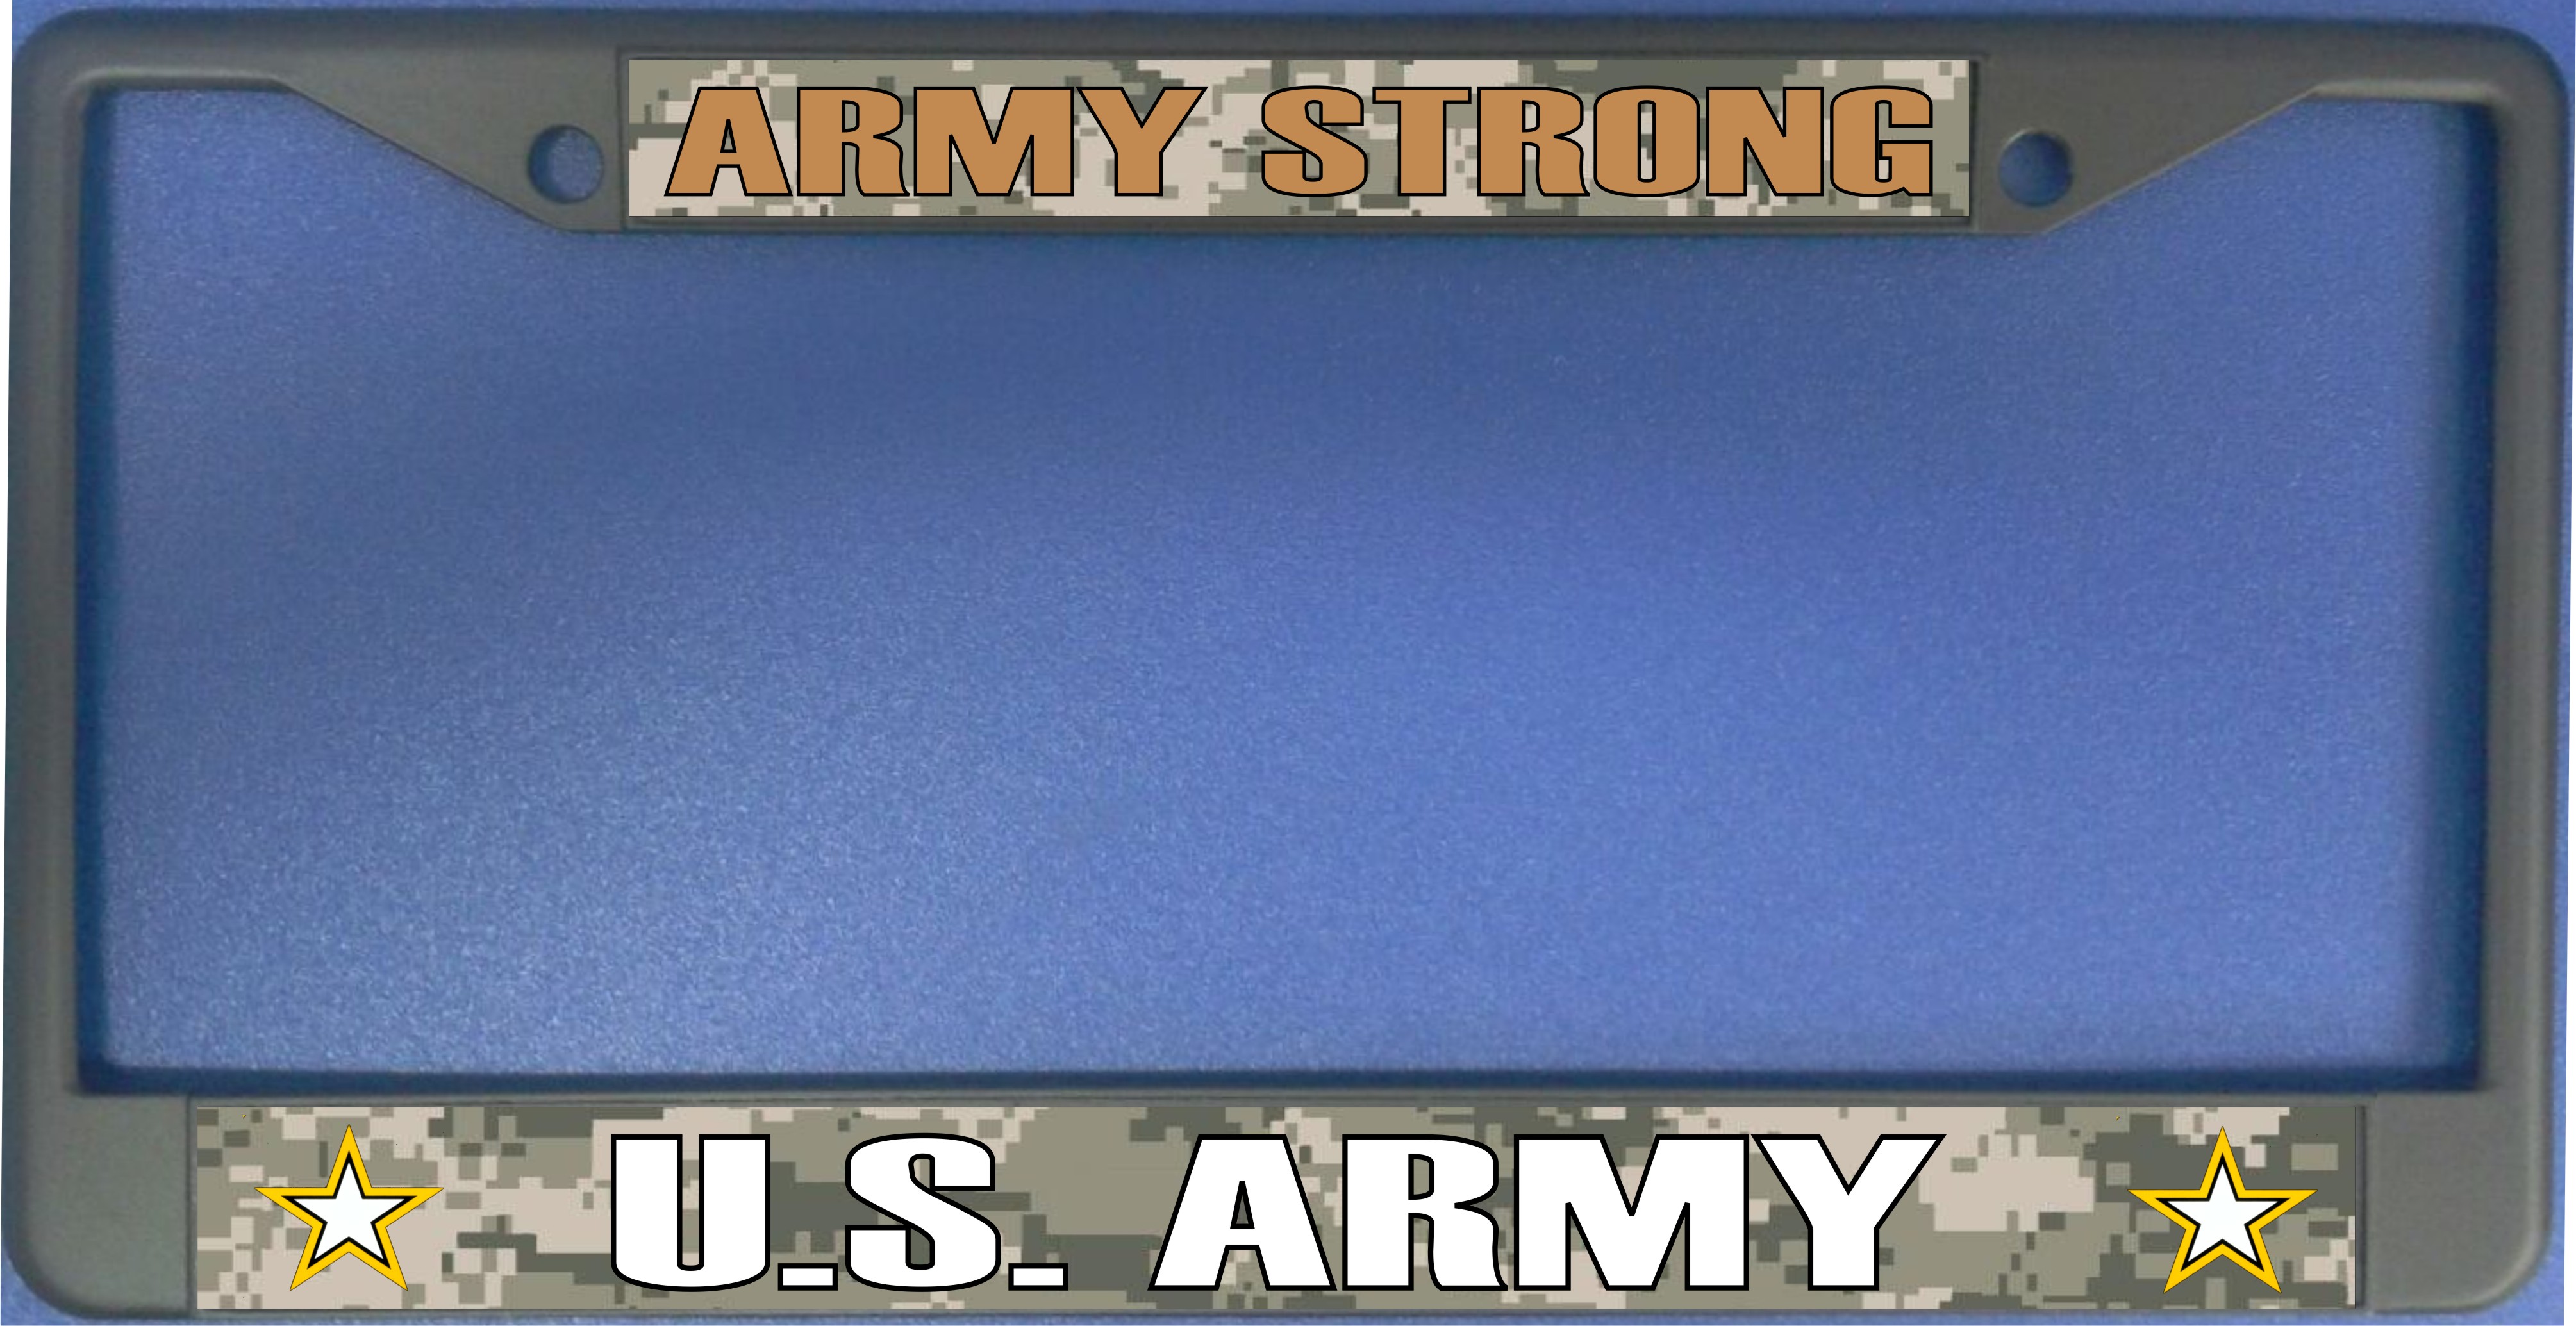 ARMY Strong Photo License Plate Frame  Free Screw CAPs with this Frame